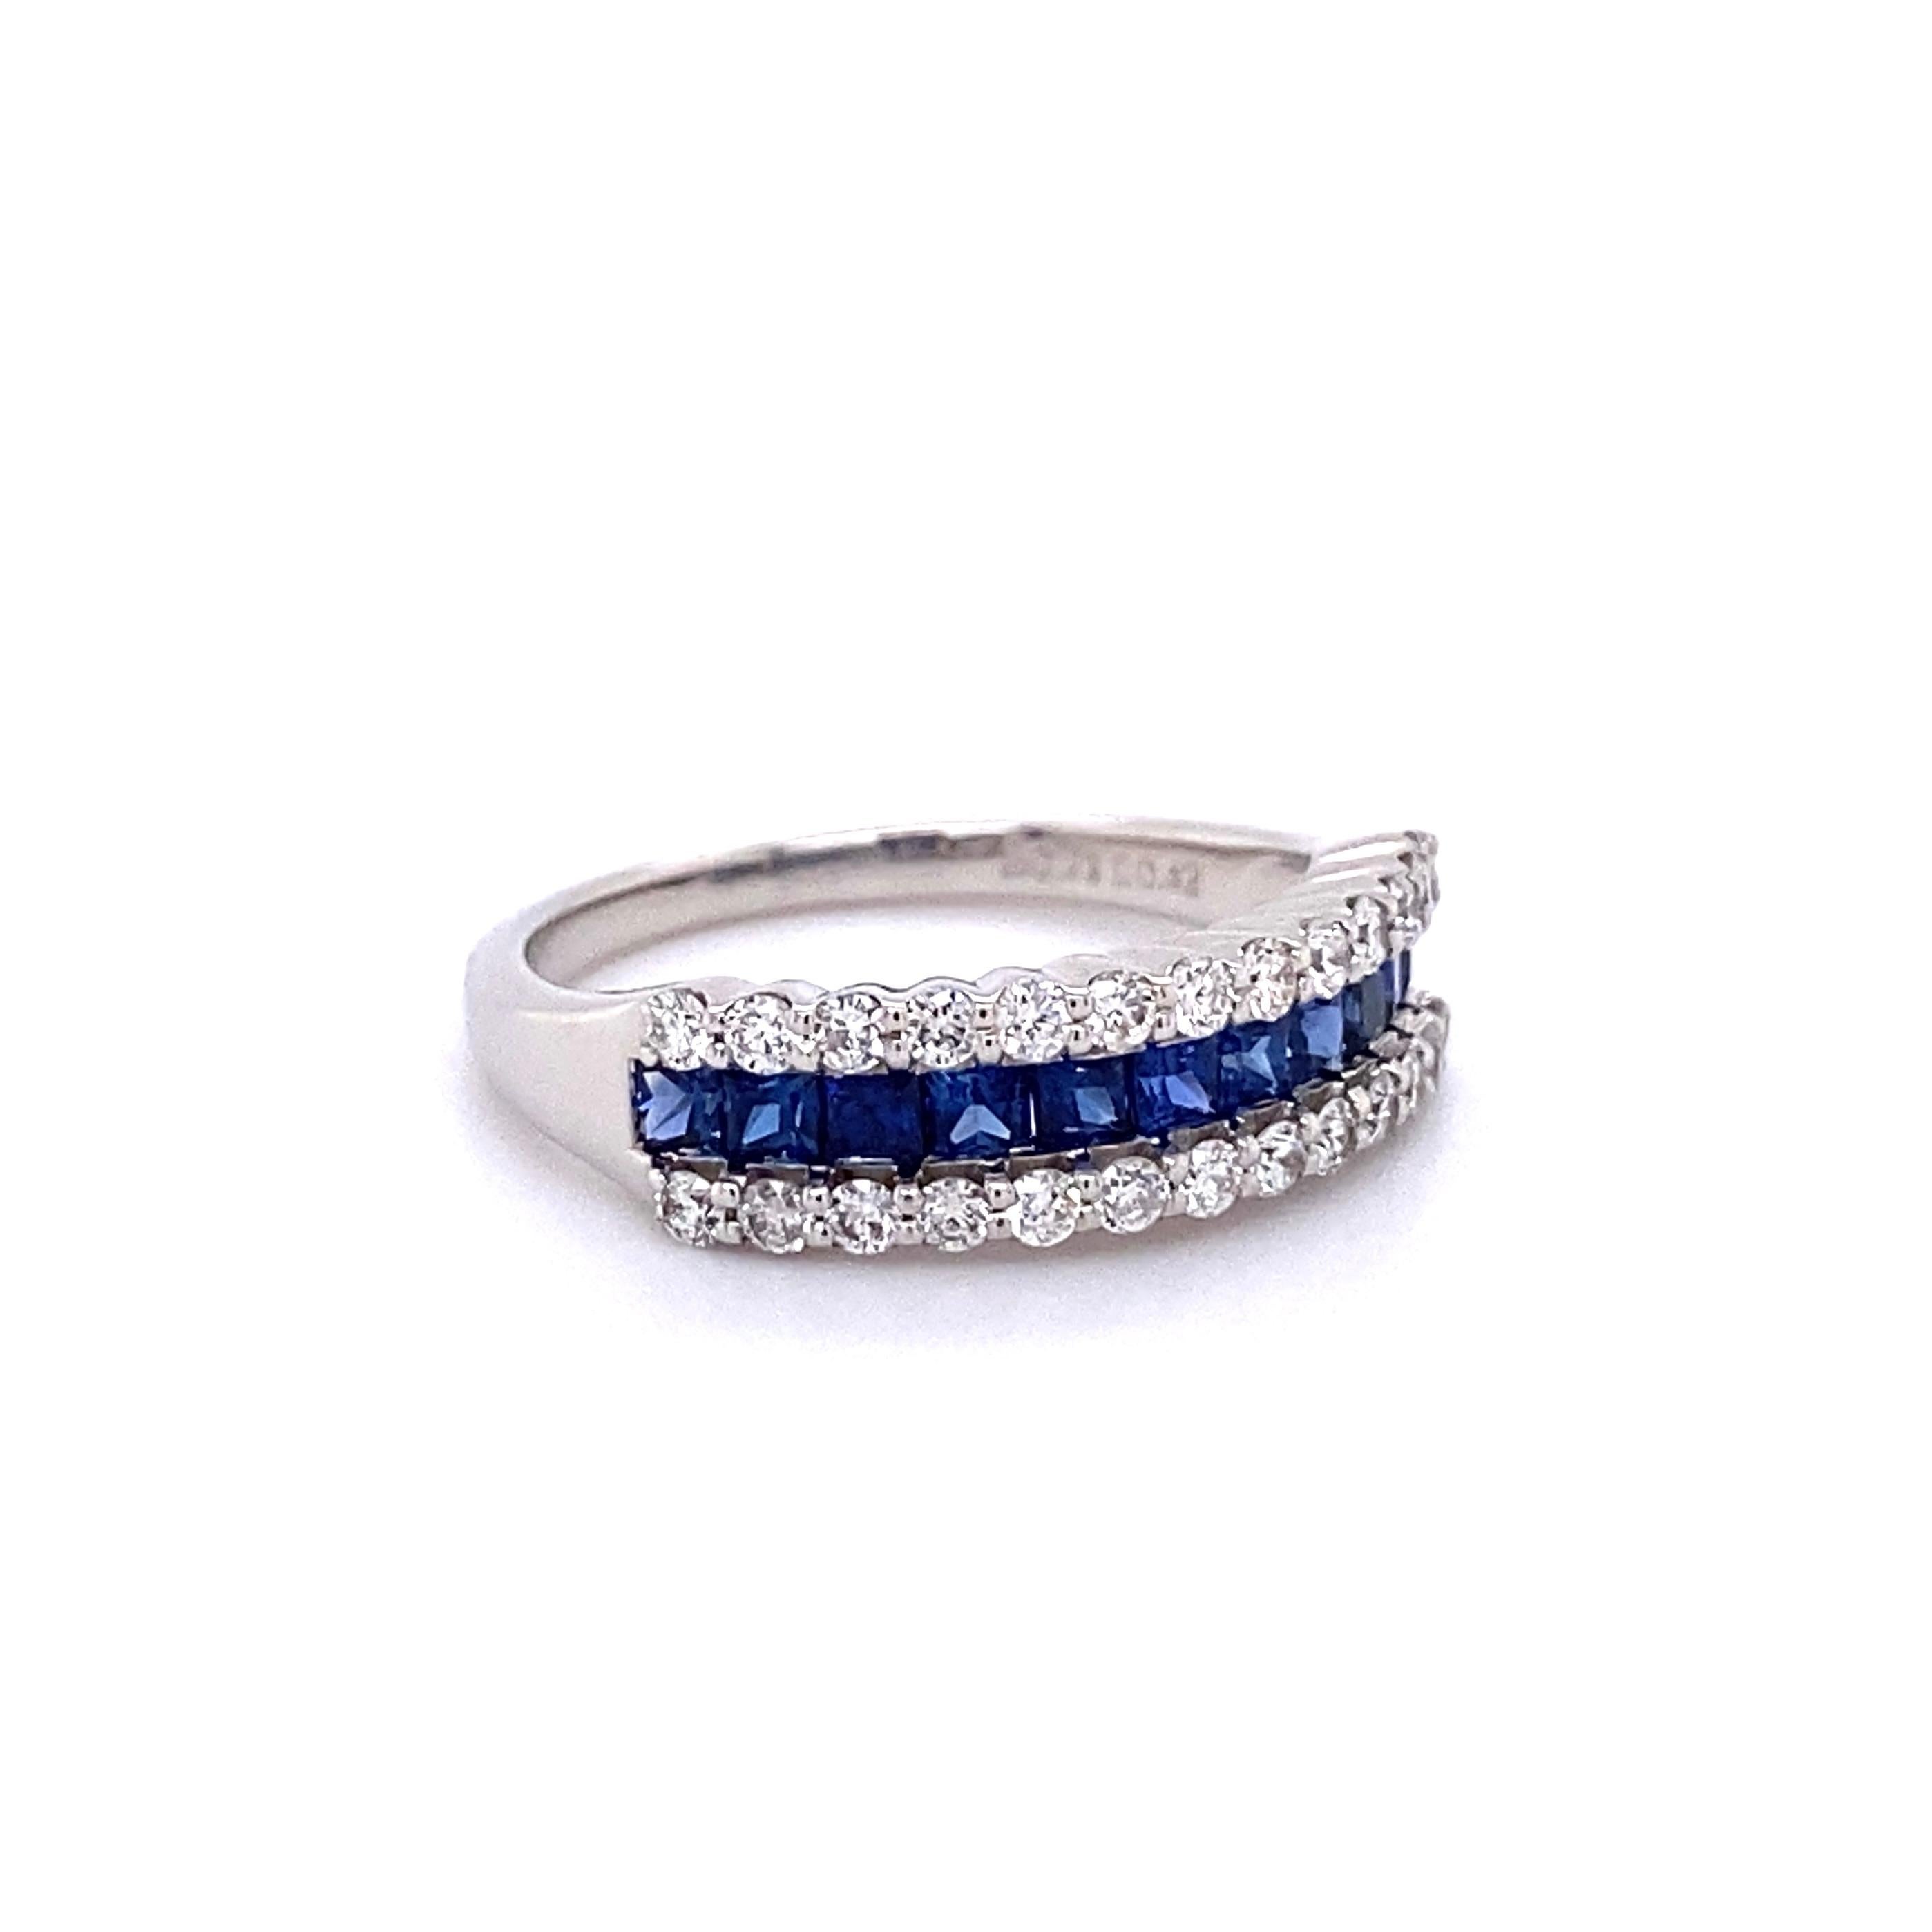 Vintage Sapphire and Diamond Platinum Band Cocktail Ring Estate Fine Jewelry In Excellent Condition For Sale In Montreal, QC